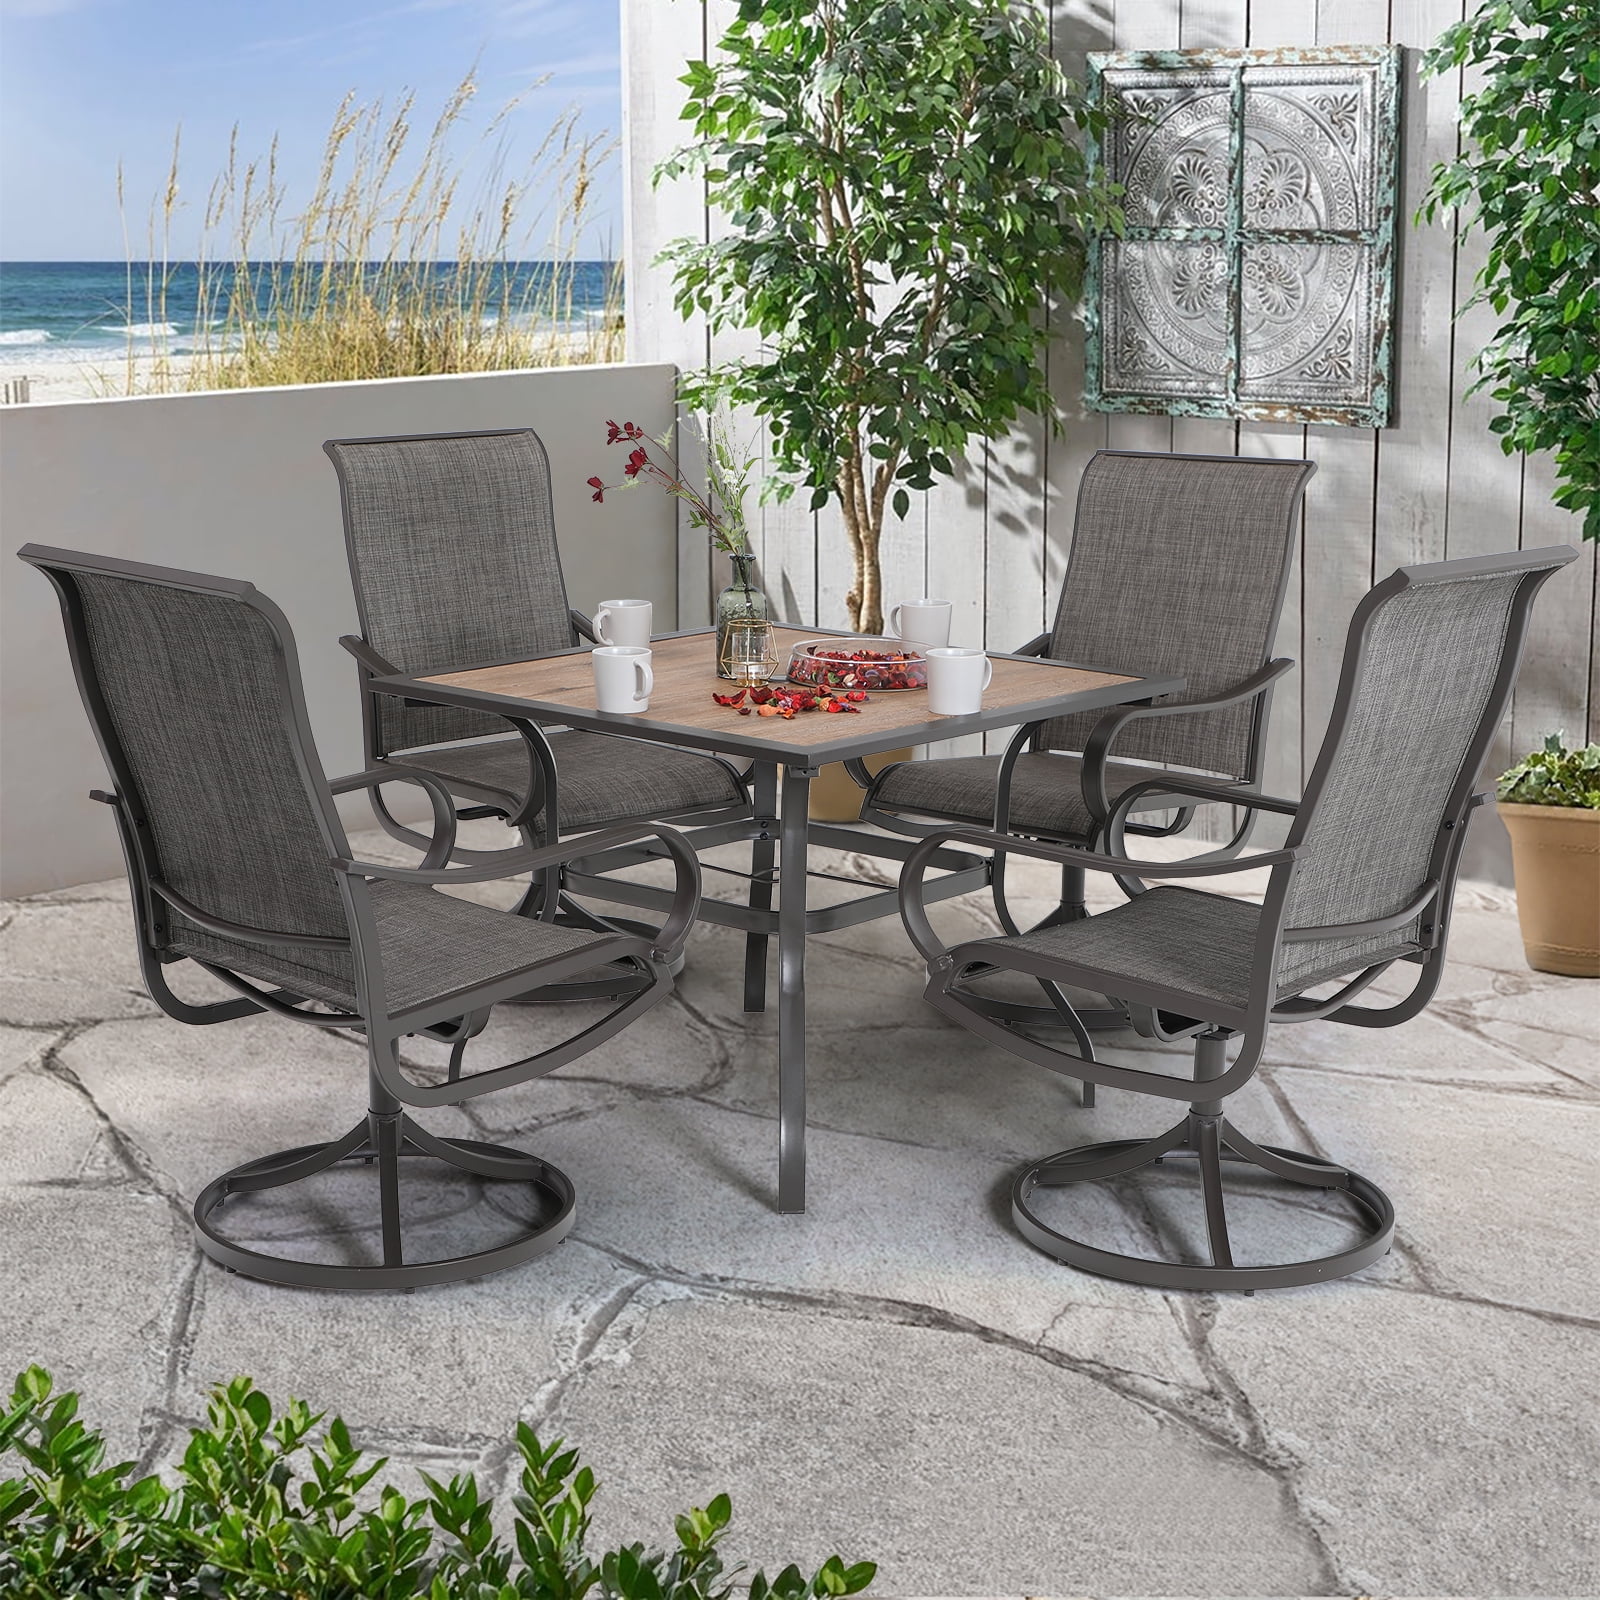 5 Piece Patio Dining Table Set All-Weather Cast Aluminum Table and Chairs Set Square Bistro Table and 4 Backyard Chairs Summer Outdoor Furniture for Yard 5 Pcs Round Table Set-Red Cushion